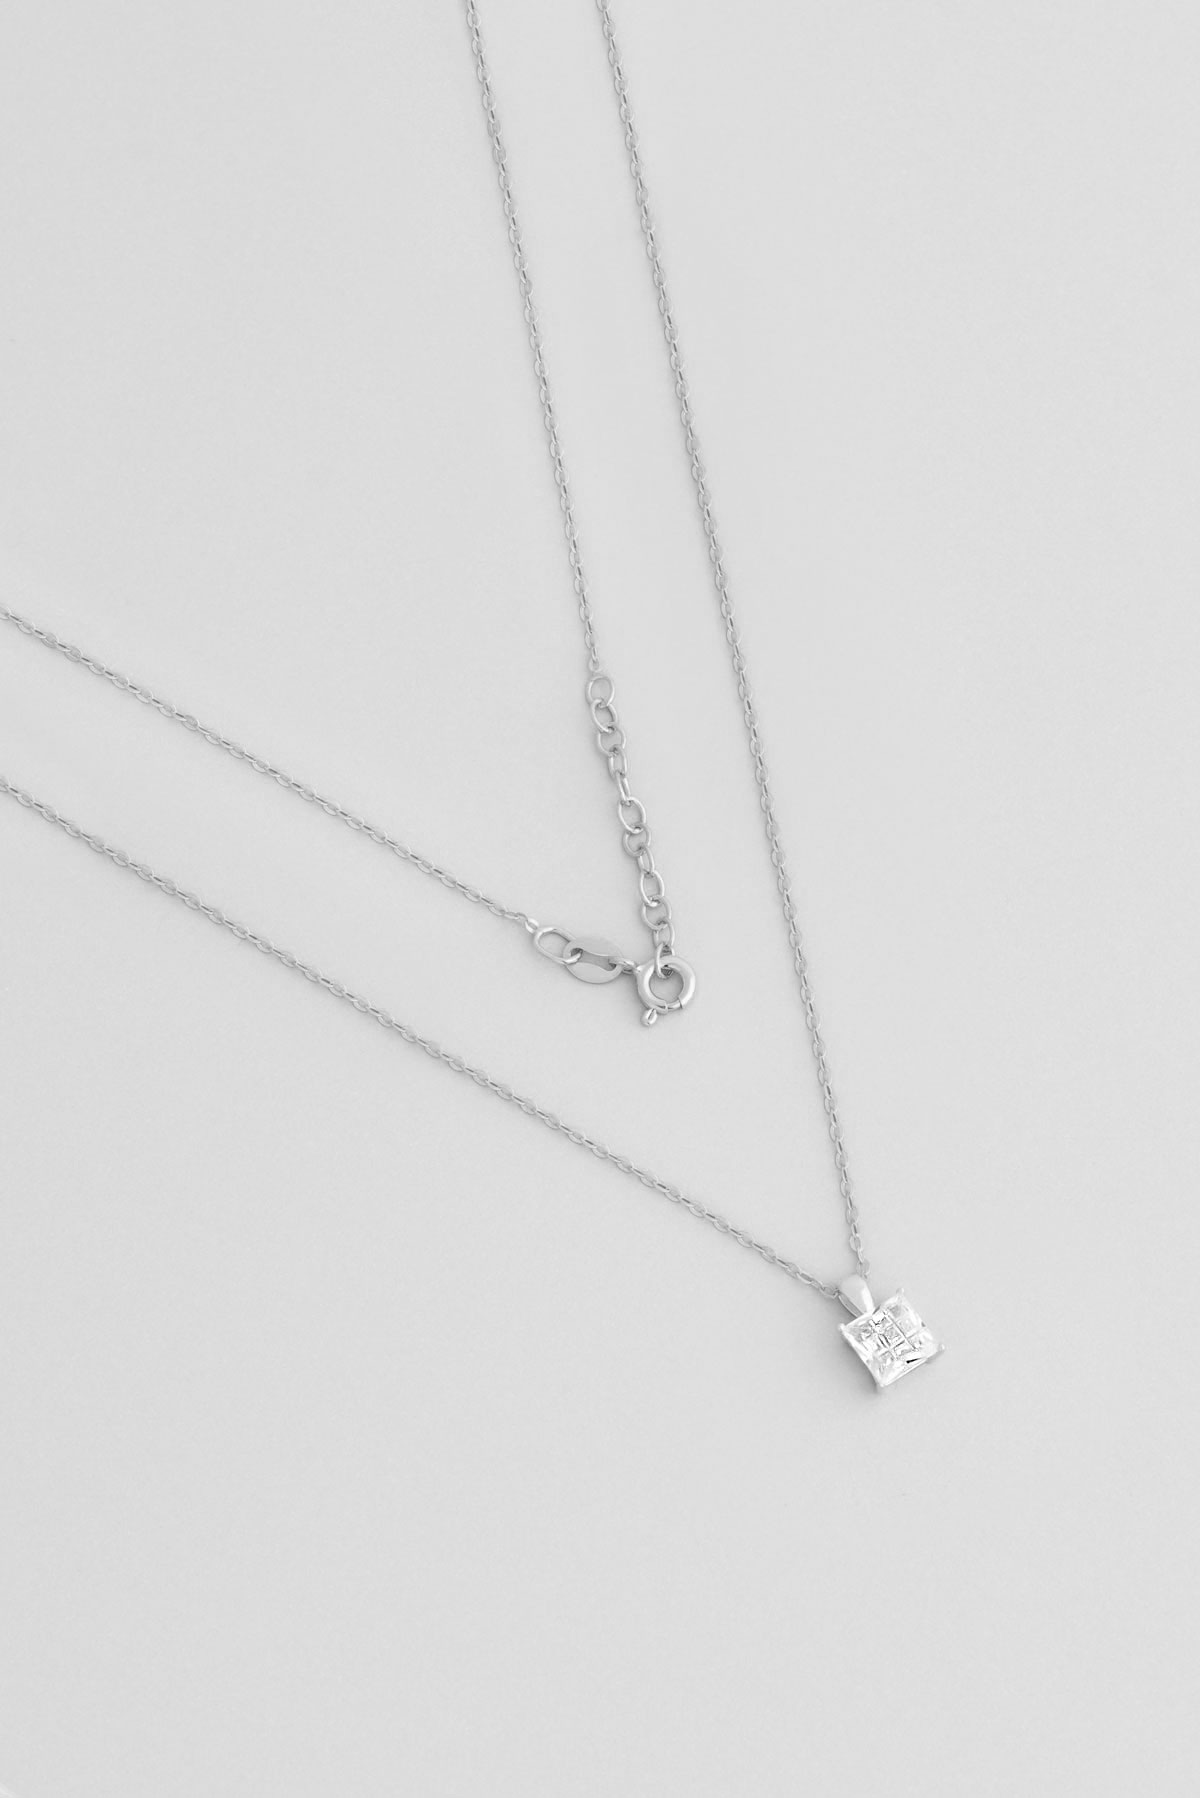  Square Cut 18 Karat White Gold Plated Silver Minimal Necklace